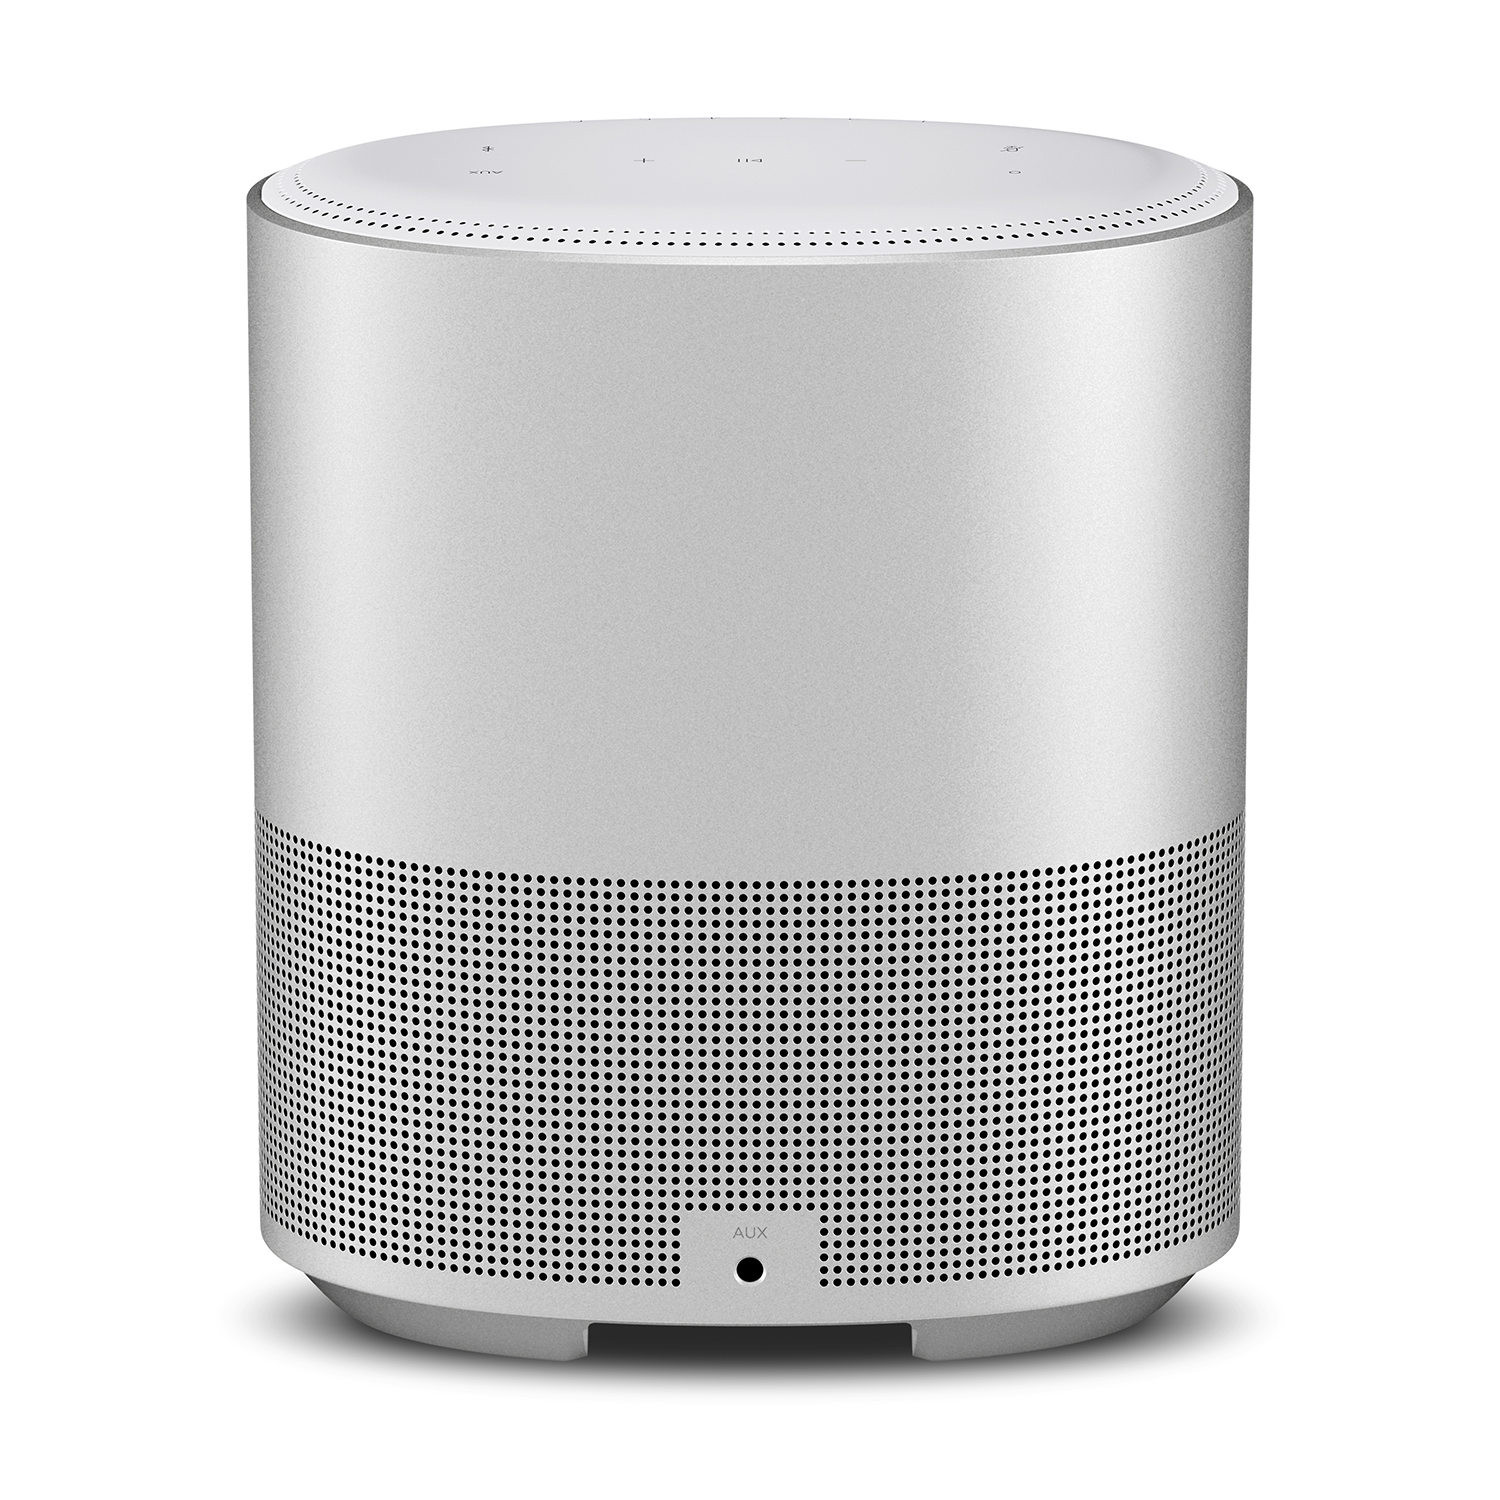 Bose Smart Speaker 500 with Wi-Fi, Bluetooth and Voice Control Built-in, Silver - image 5 of 6